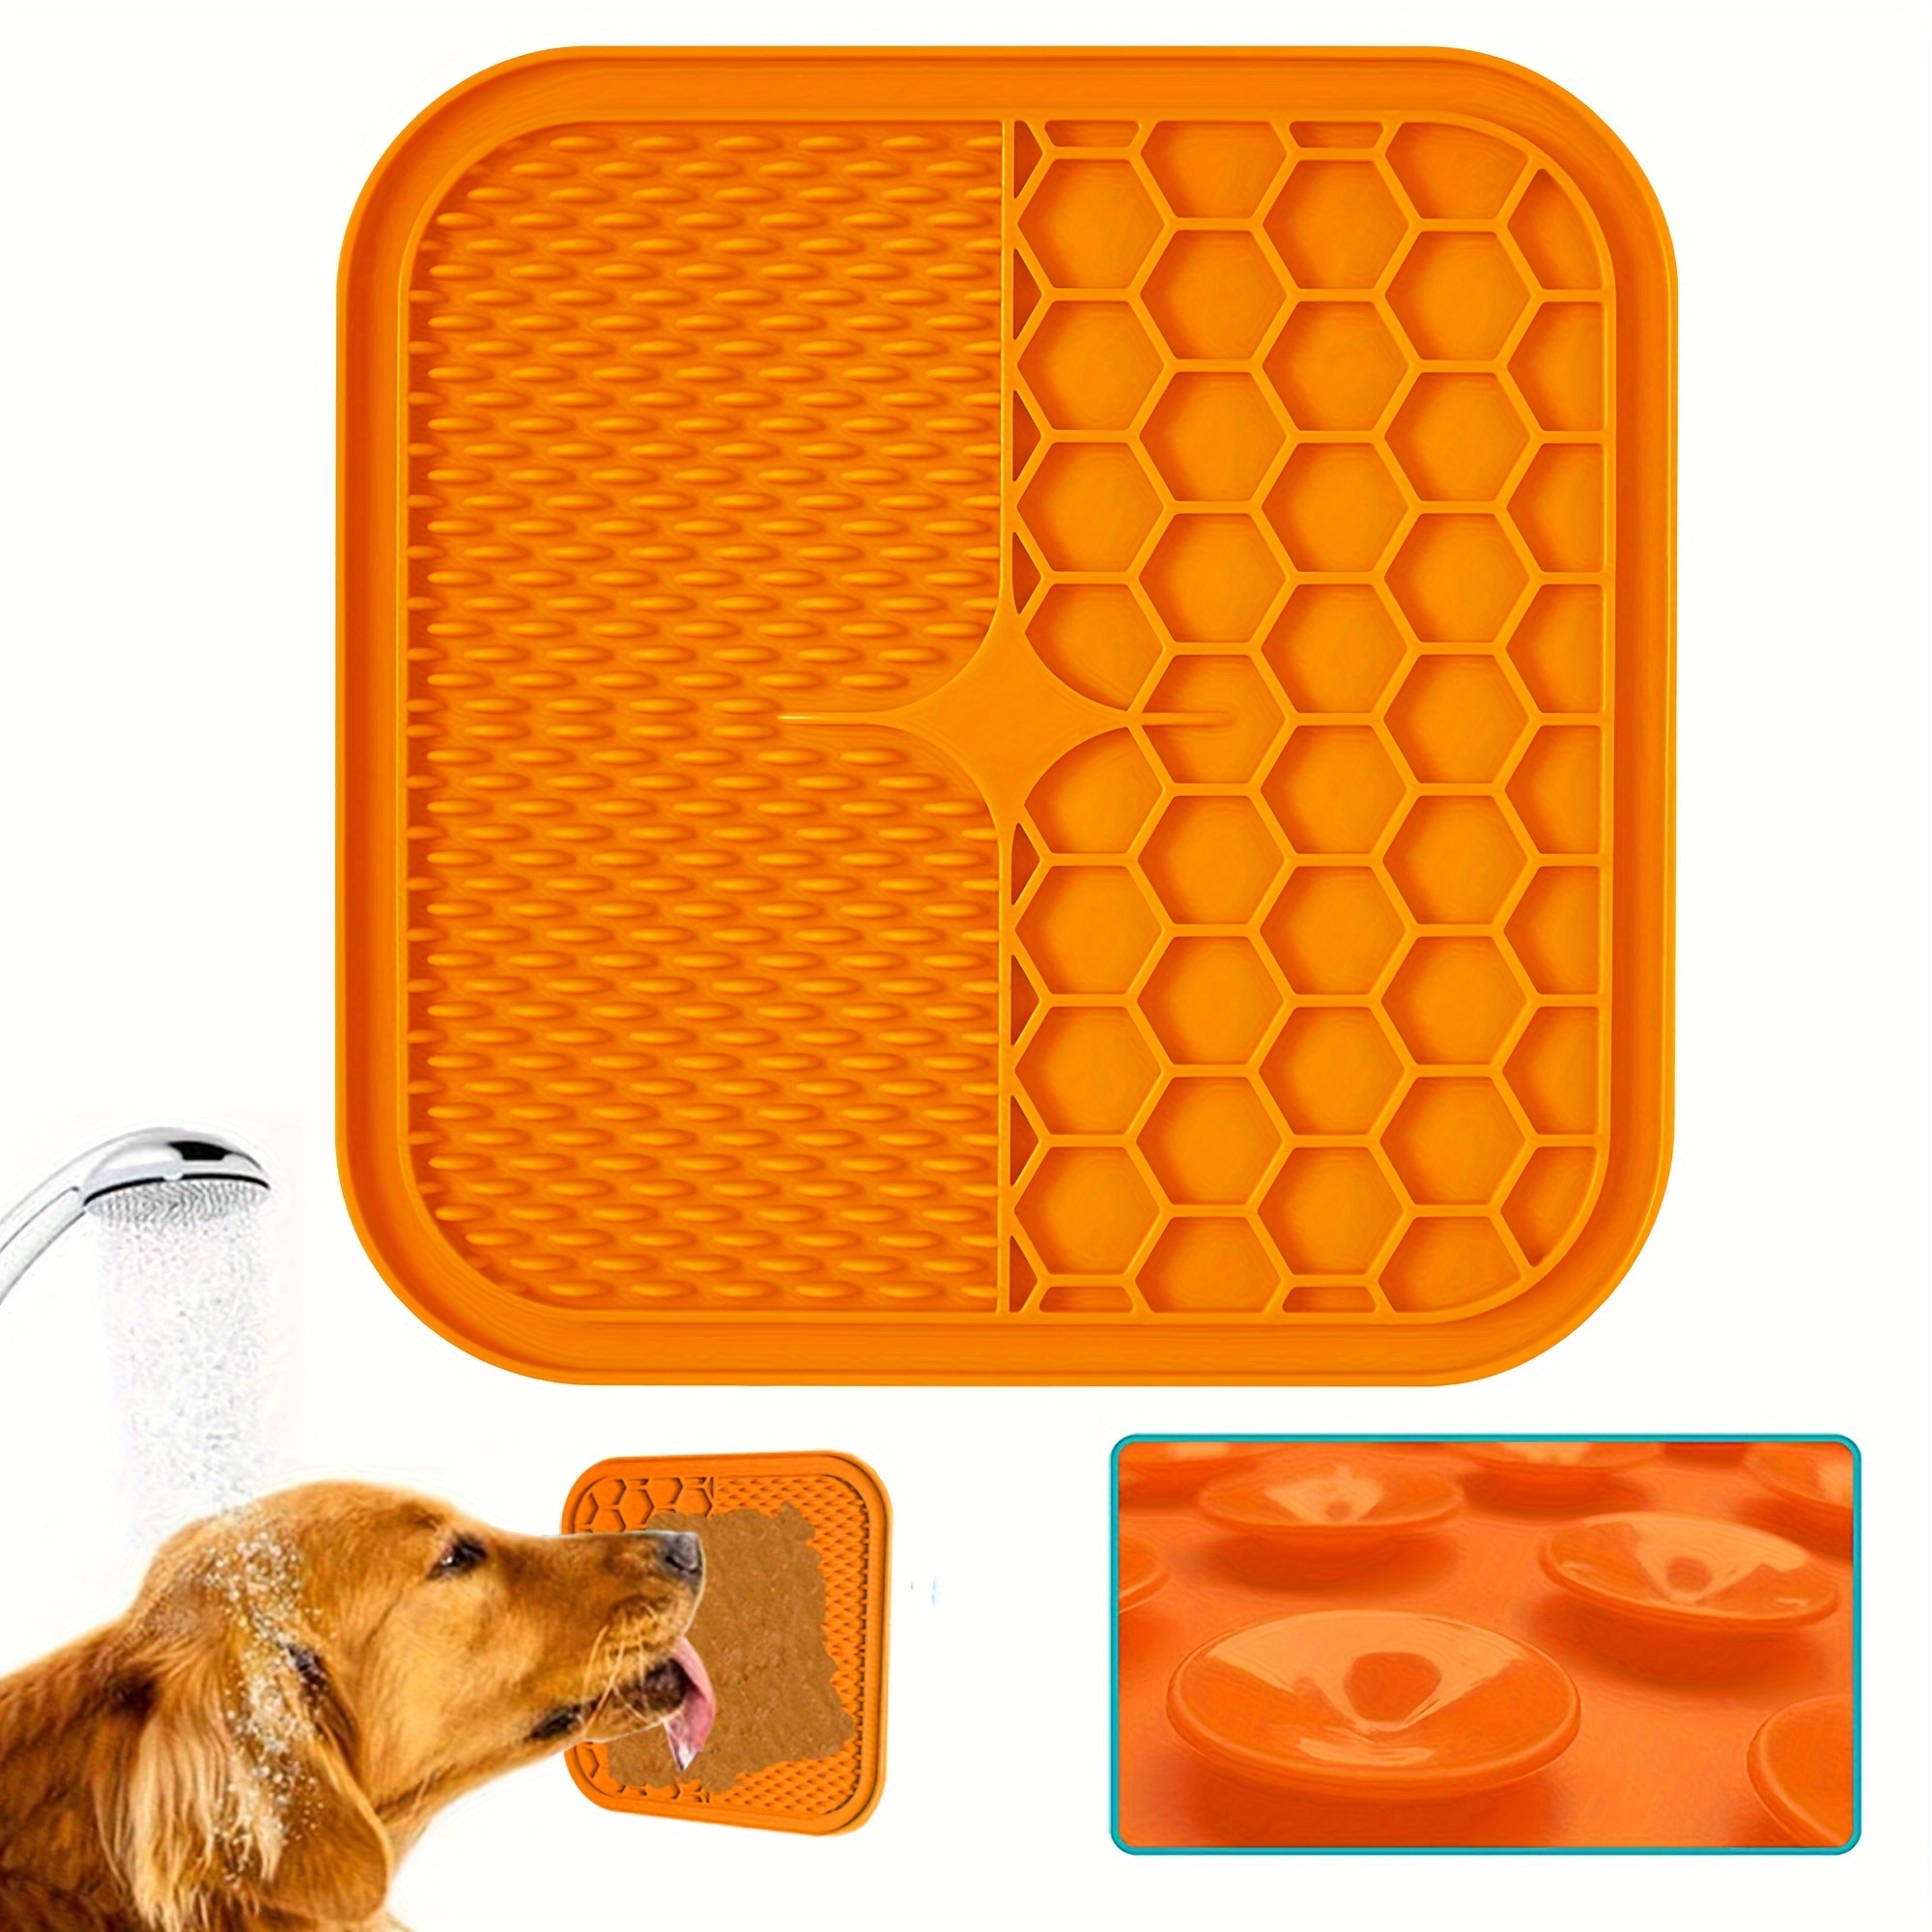  Dog Lick Pad for Dogs, 2 pcs Good for Grooming, Dog